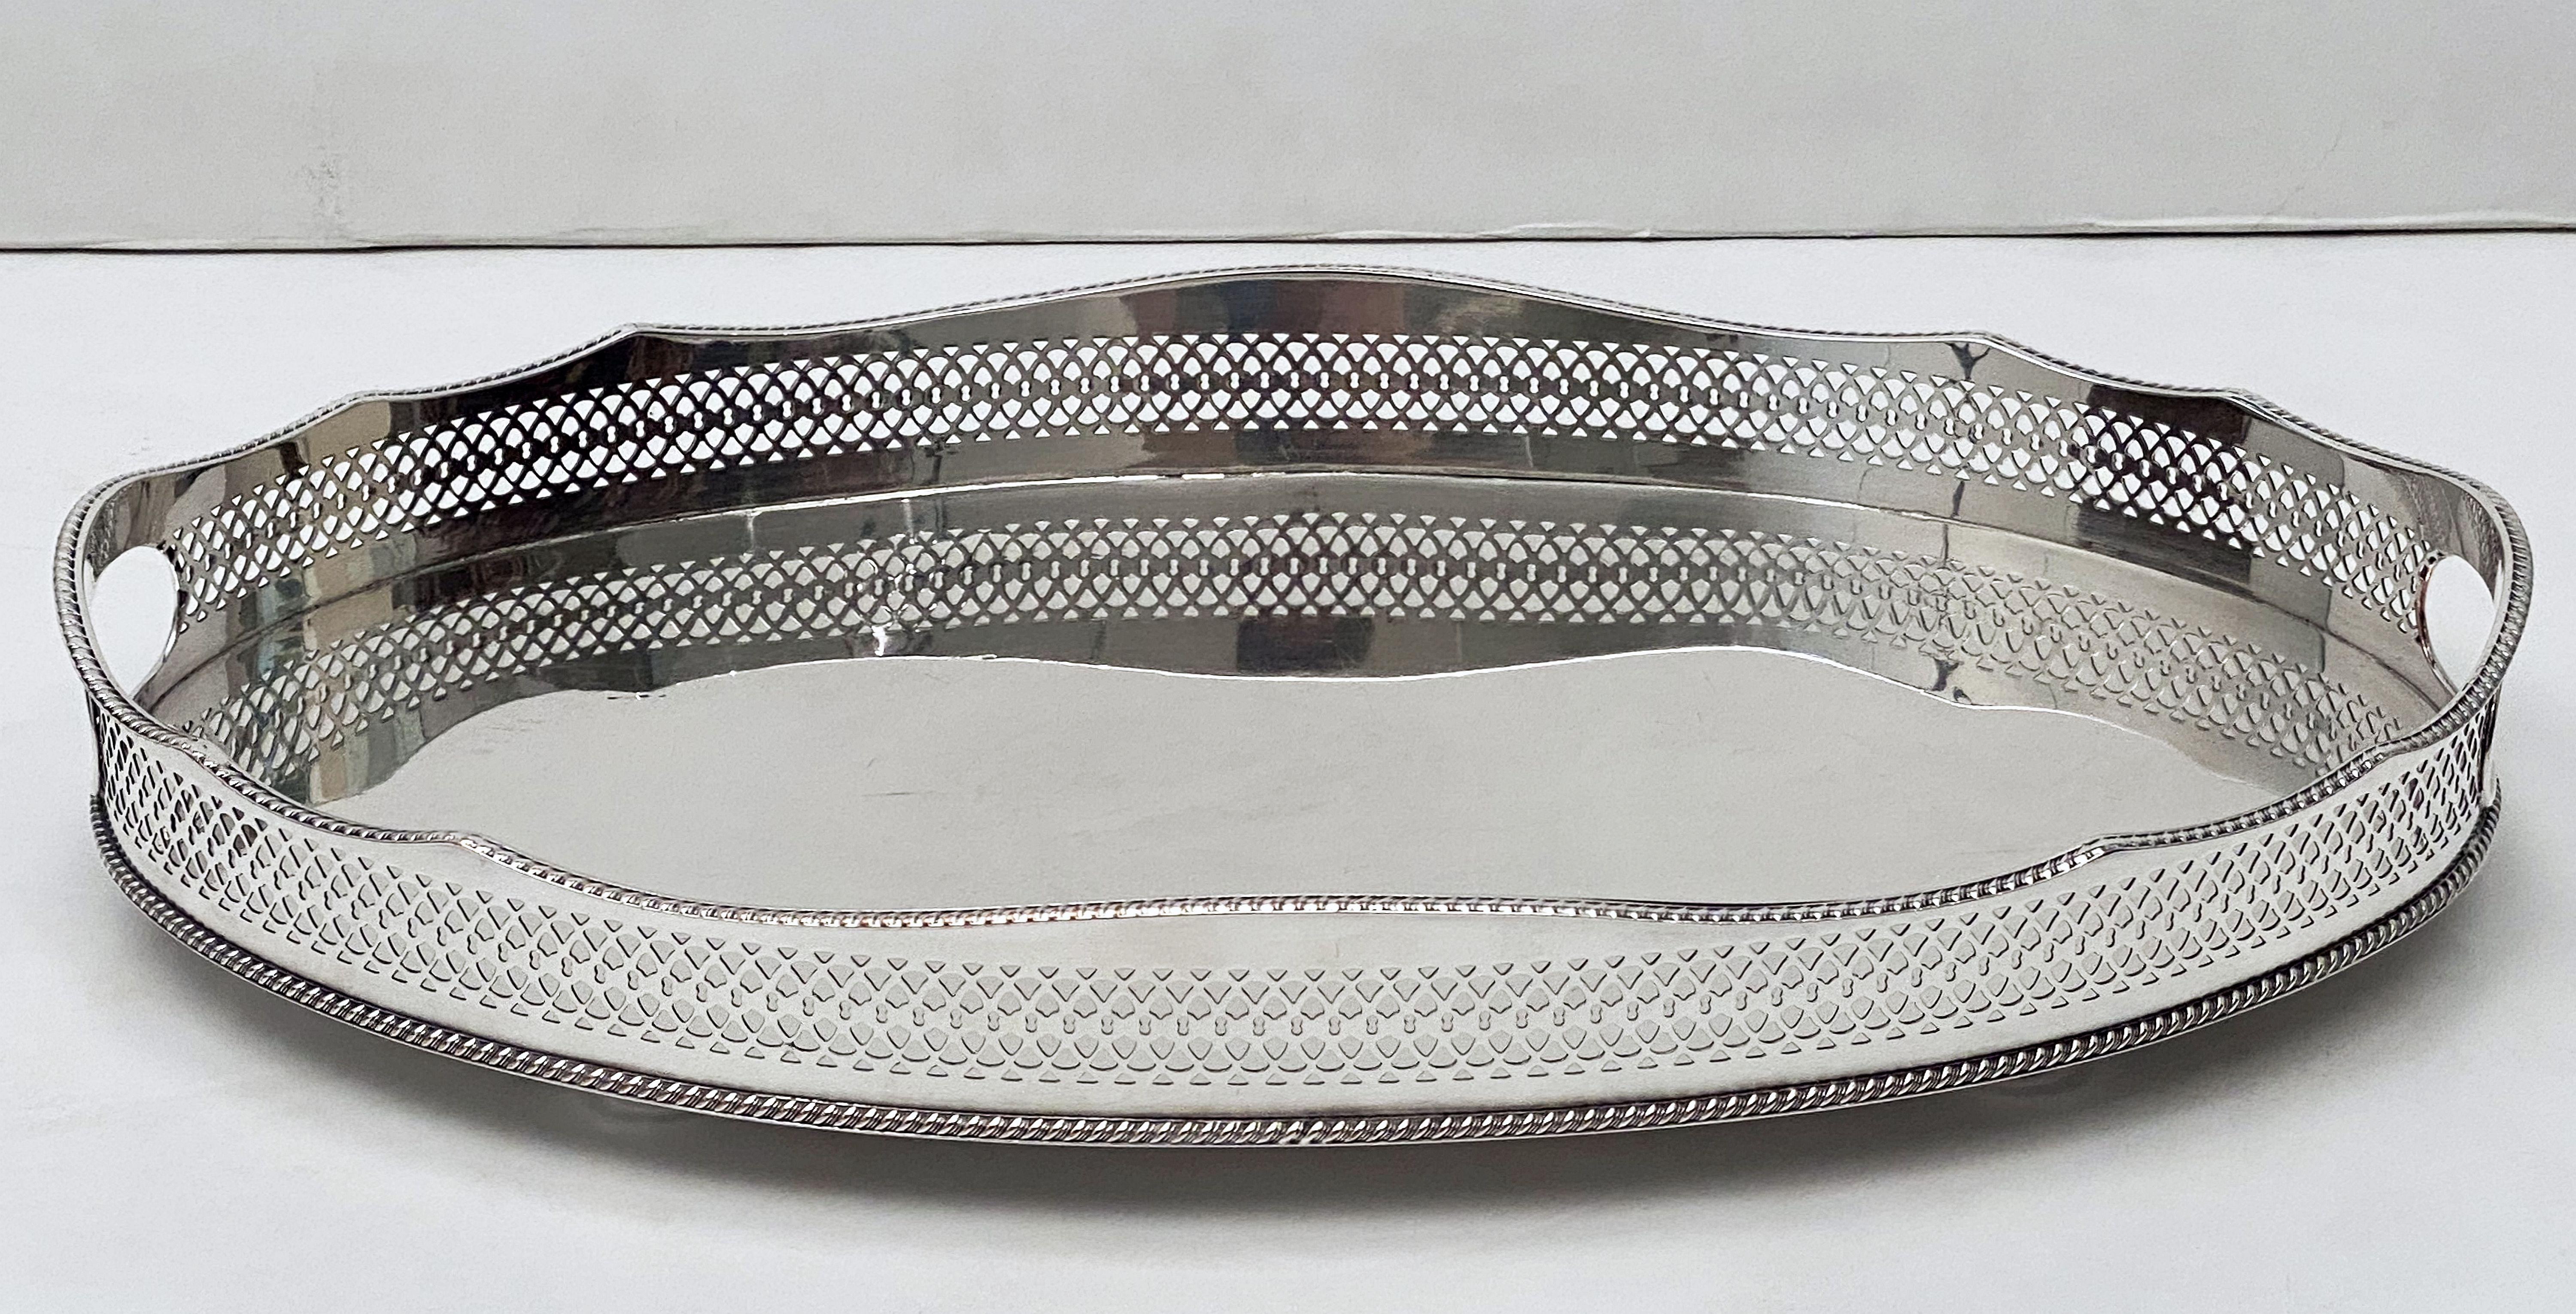 A handsome pair of large English oval gallery serving or drinks trays (or platters), each with pierced serpentine gallery around the circumference.
of fine English plate silver. 

Dimensions: Gallery H 2 3/4 inches x W 18 1/4 inches x D 12 1/4